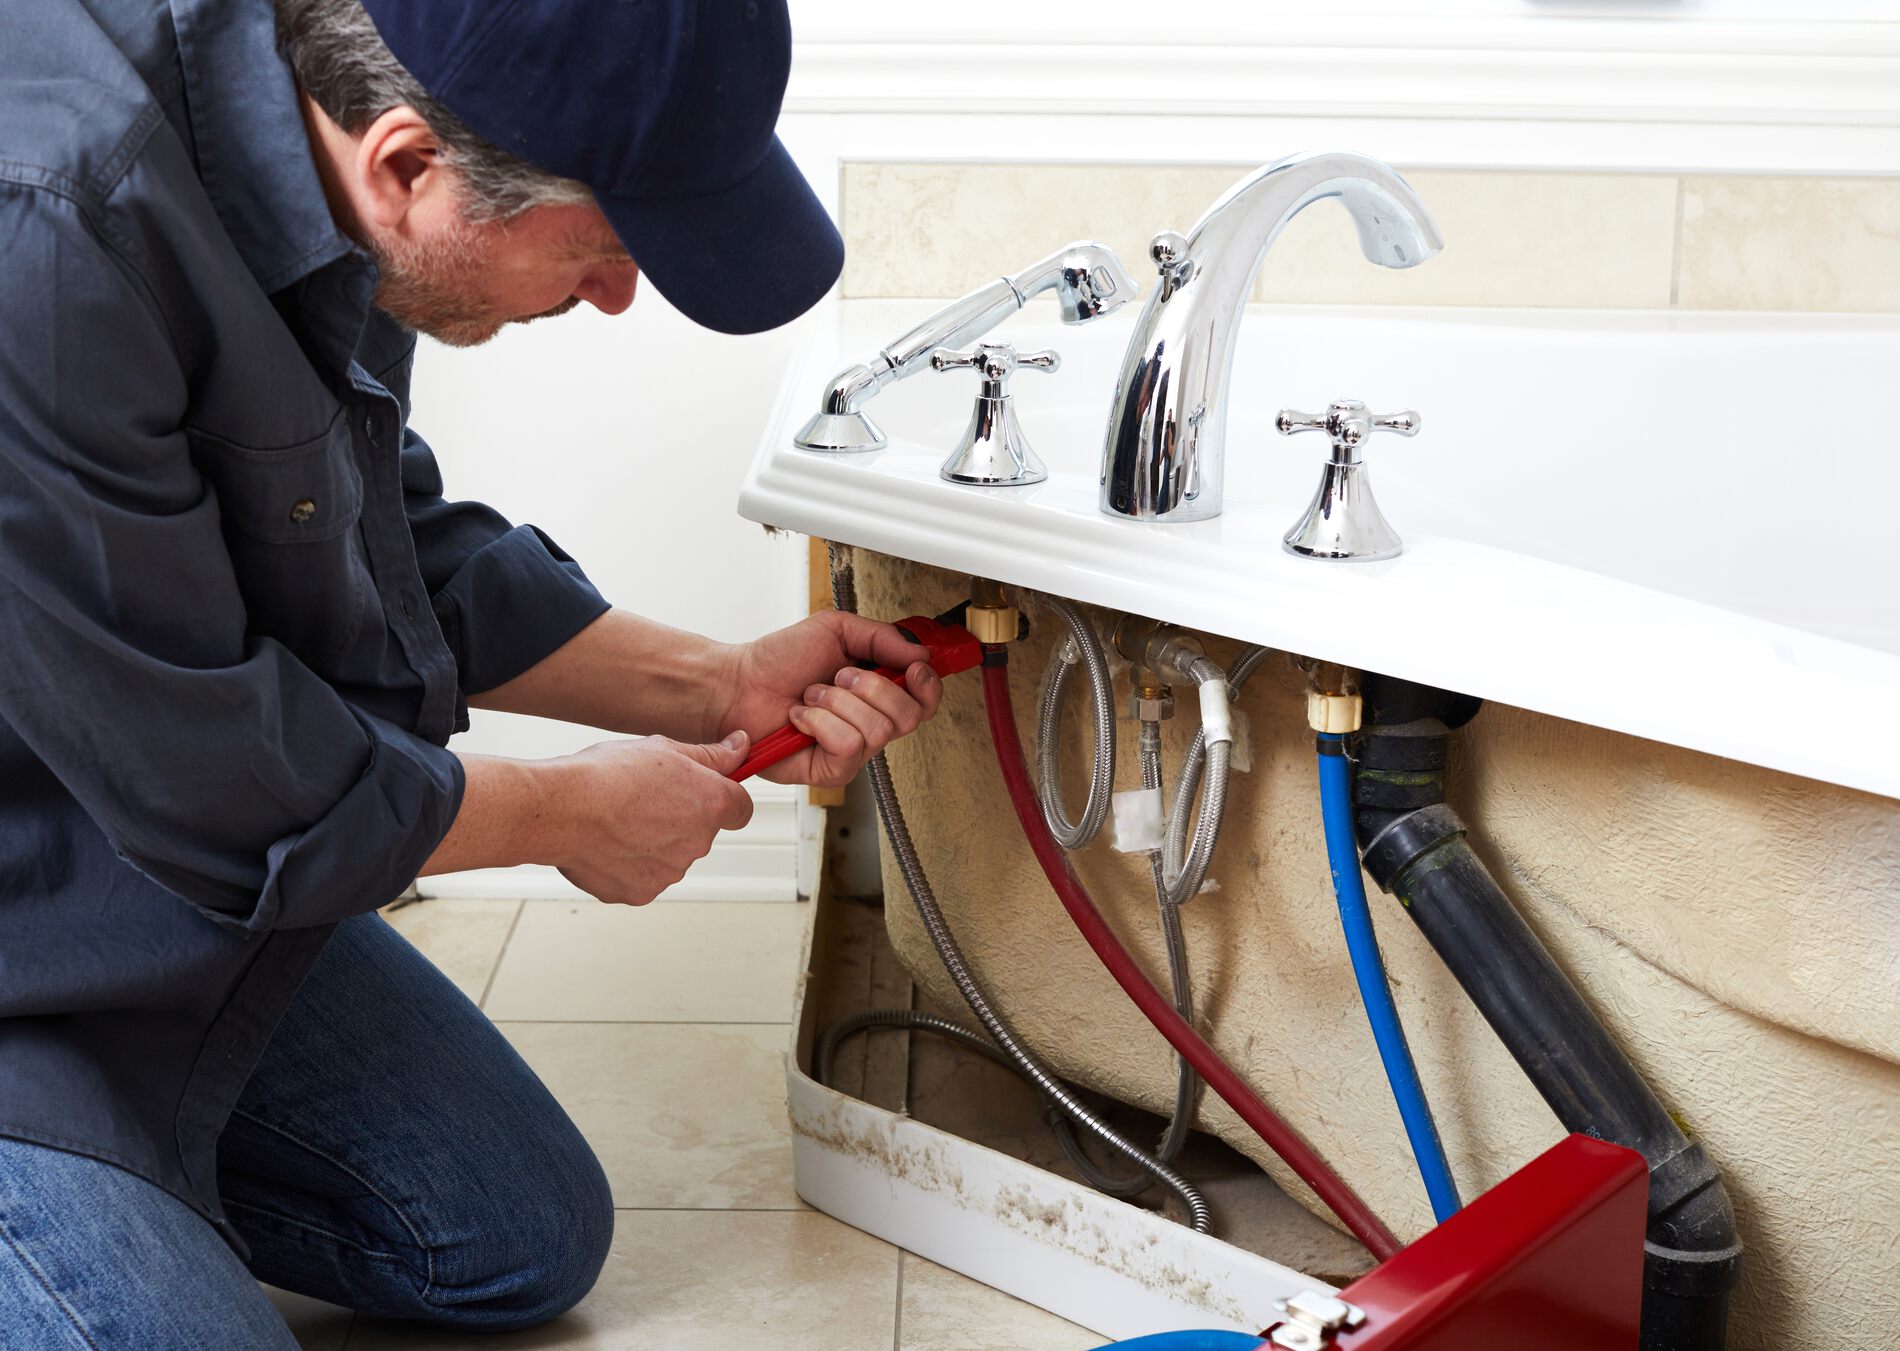 Plumbing Services in Eagle, ID